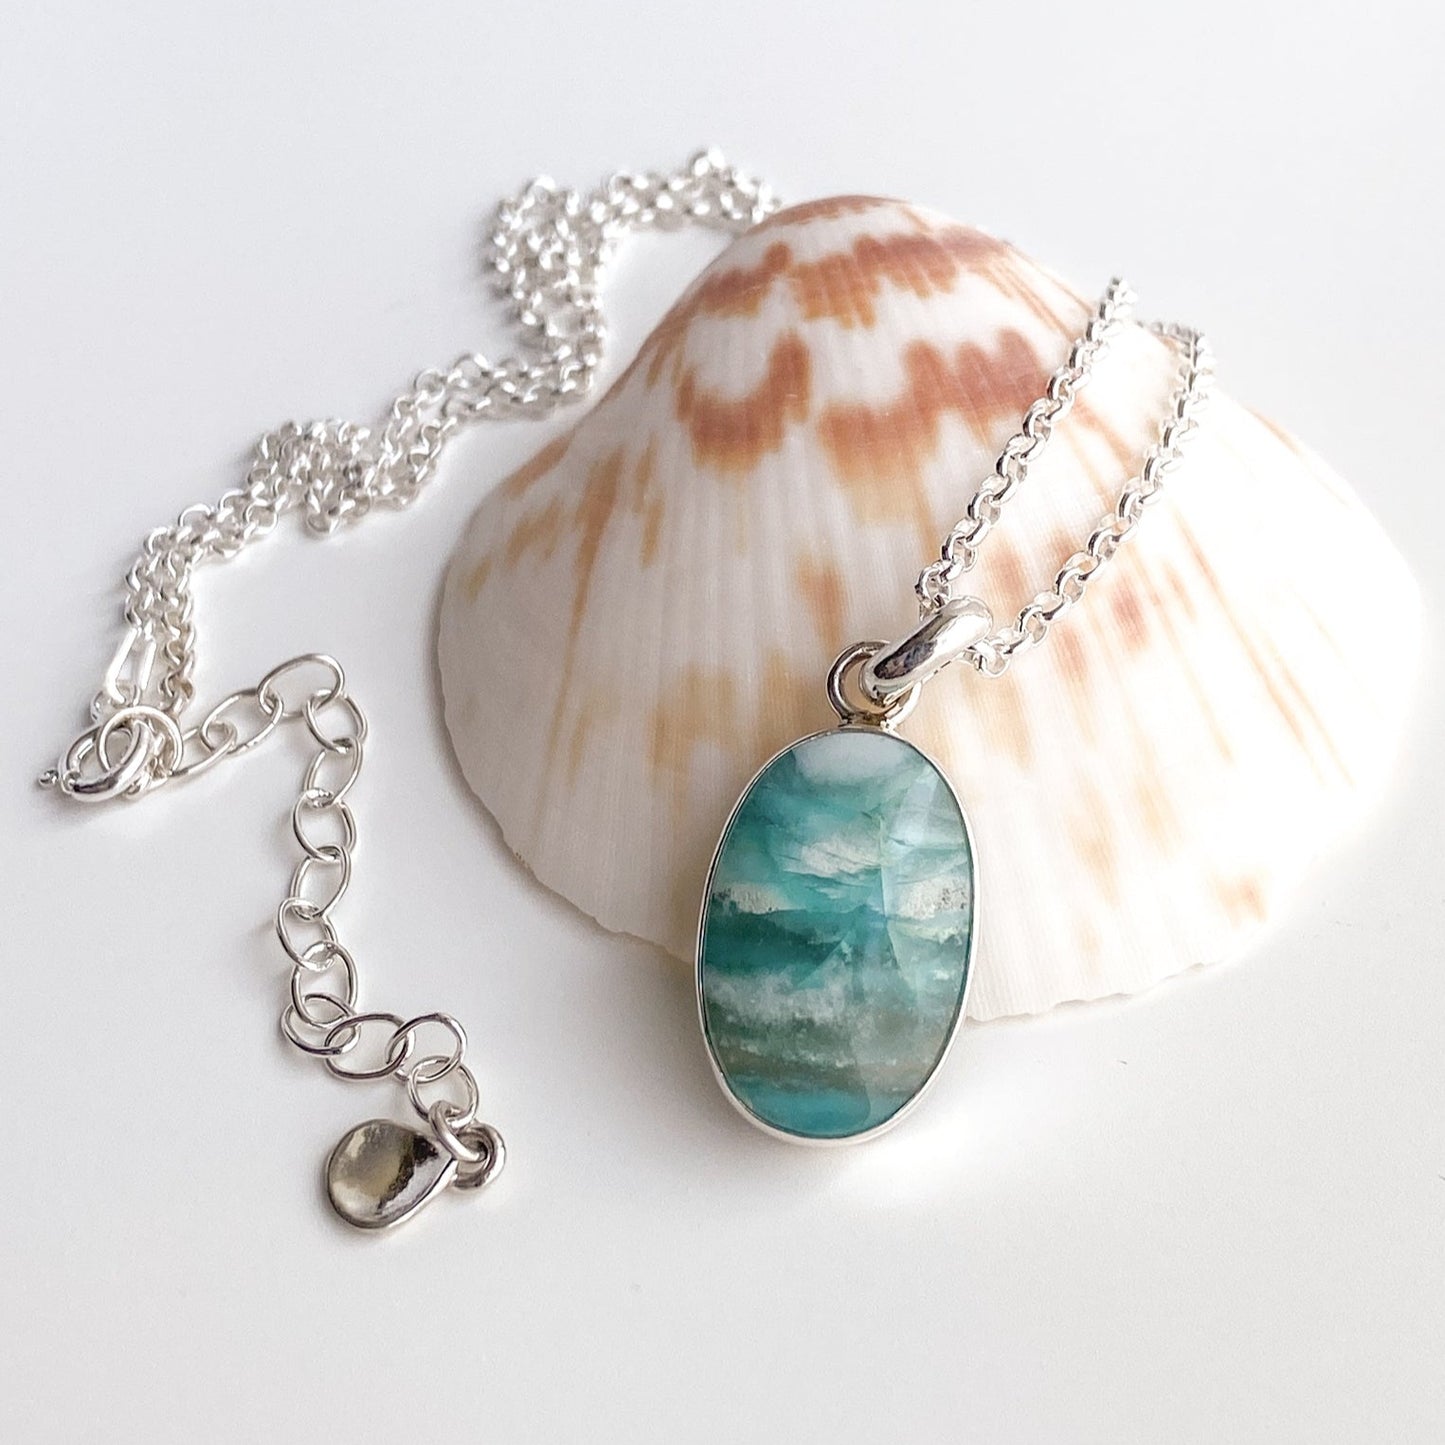 Ocean blue opalized wood and silver pendant draped around a scallop shell on a white background.